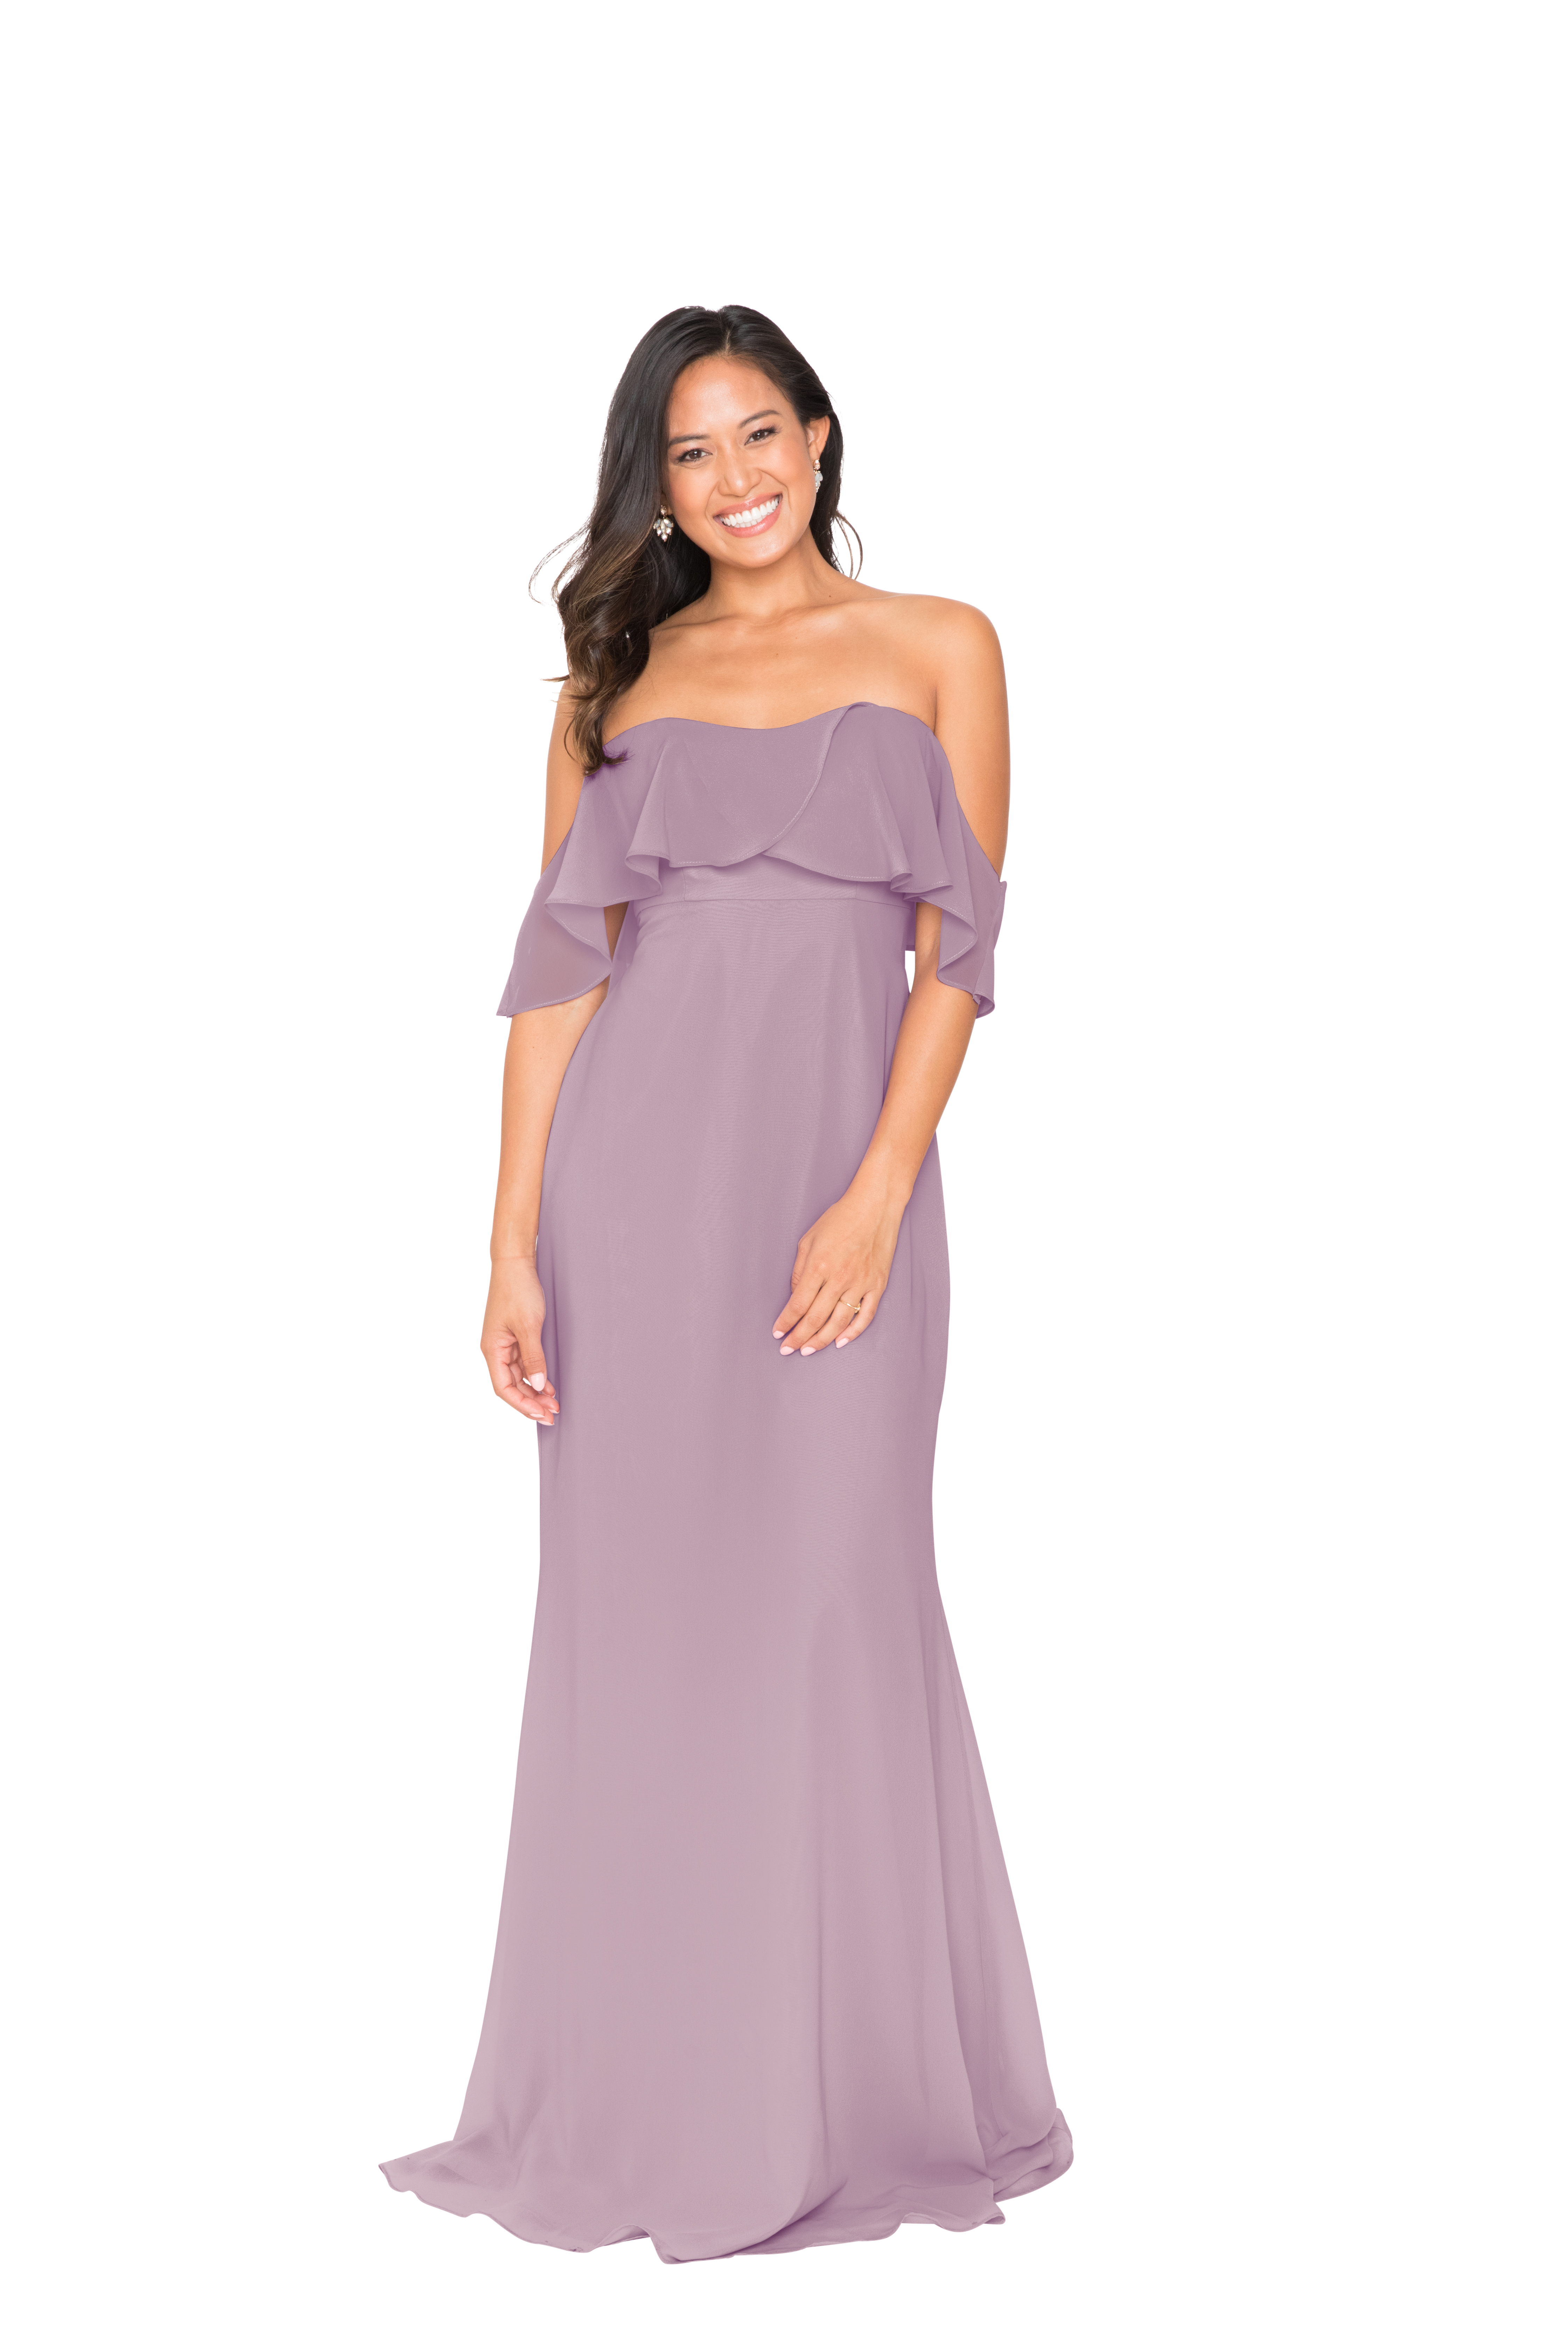 "Lucy" Bridesmaid Dress from Brideside